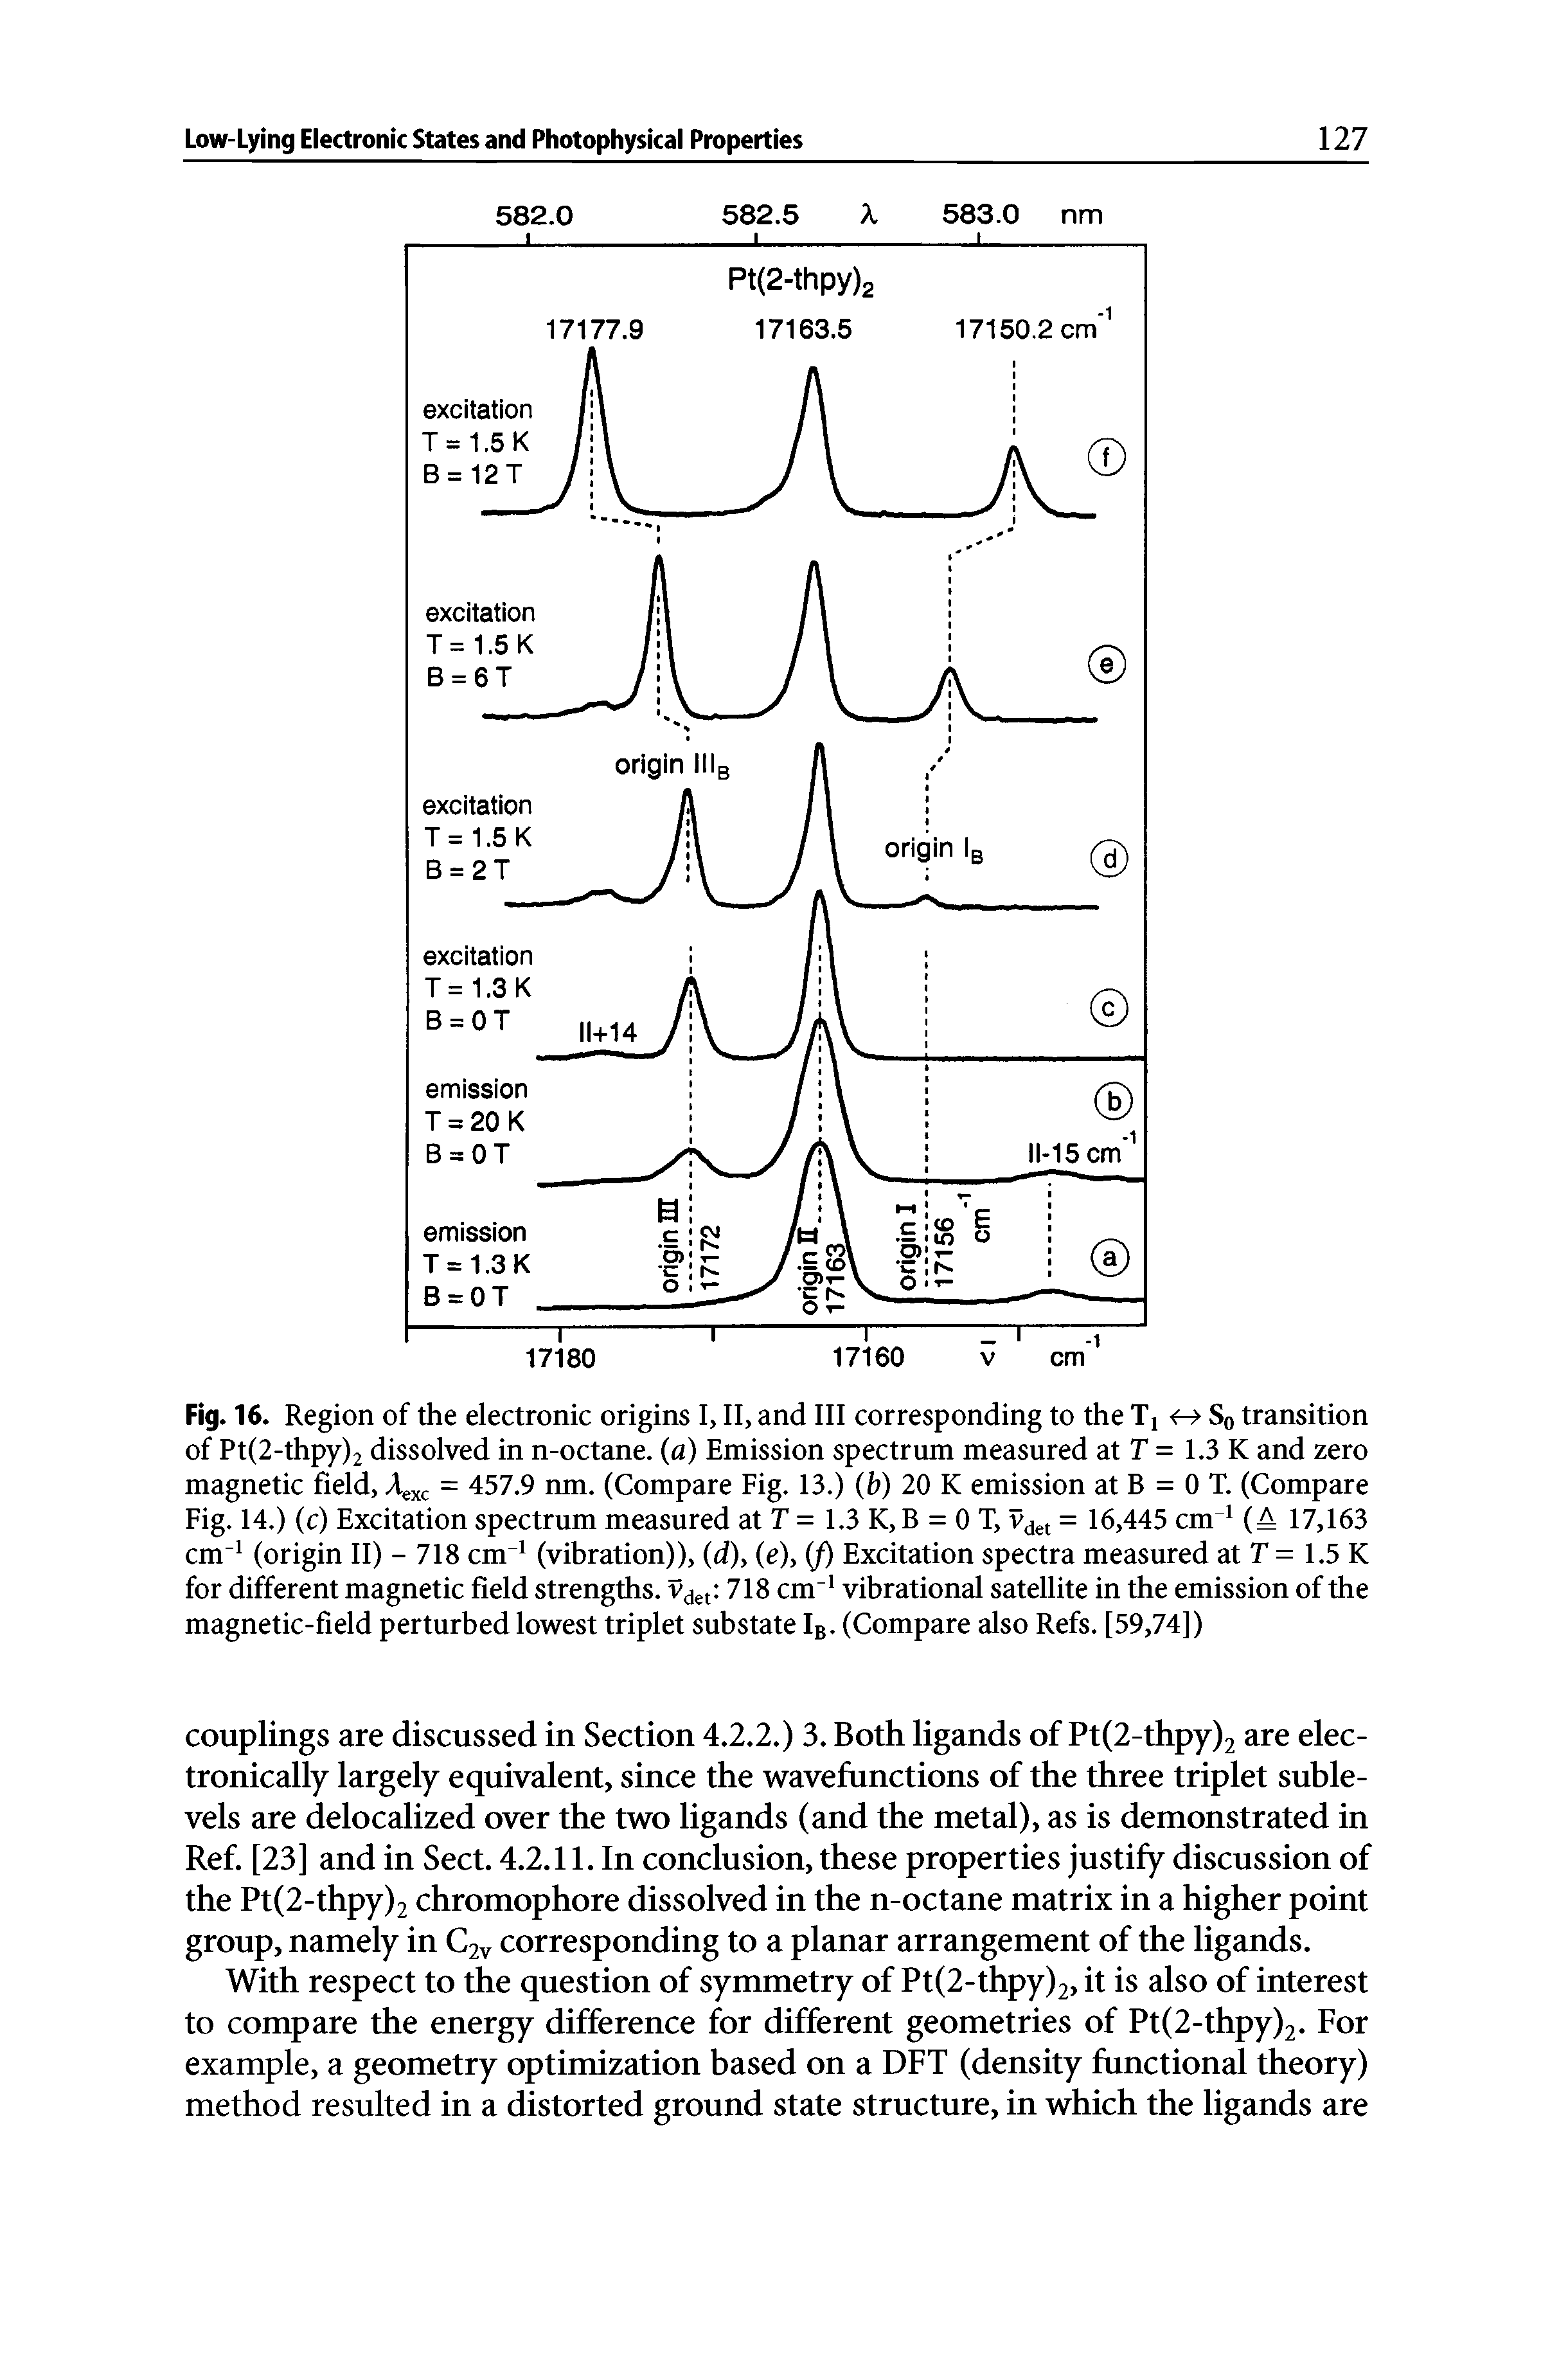 Fig. 16. Region of the electronic origins I, II, and III corresponding to the T, So transition of Pt(2-thpy)2 dissolved in n-octane. (a) Emission spectrum measured at T = 1.3 K and zero magnetic field, Aexc = 457.9 nm. (Compare Fig. 13.) (b) 20 K emission at B = 0 T. (Compare Fig. 14.) (c) Excitation spectrum measured at T = 1.3 K, B = 0 T, = 16,445 cm (A 17,163 cm (origin II) - 718 cm (vibration)), (d), (e), (f) Excitation spectra measured at T = 1.5 K for different magnetic field strengths, 718 cm vibrational satellite in the emission of the magnetic-field perturbed lowest triplet substate Ib- (Compare also Refs. [59,74])...